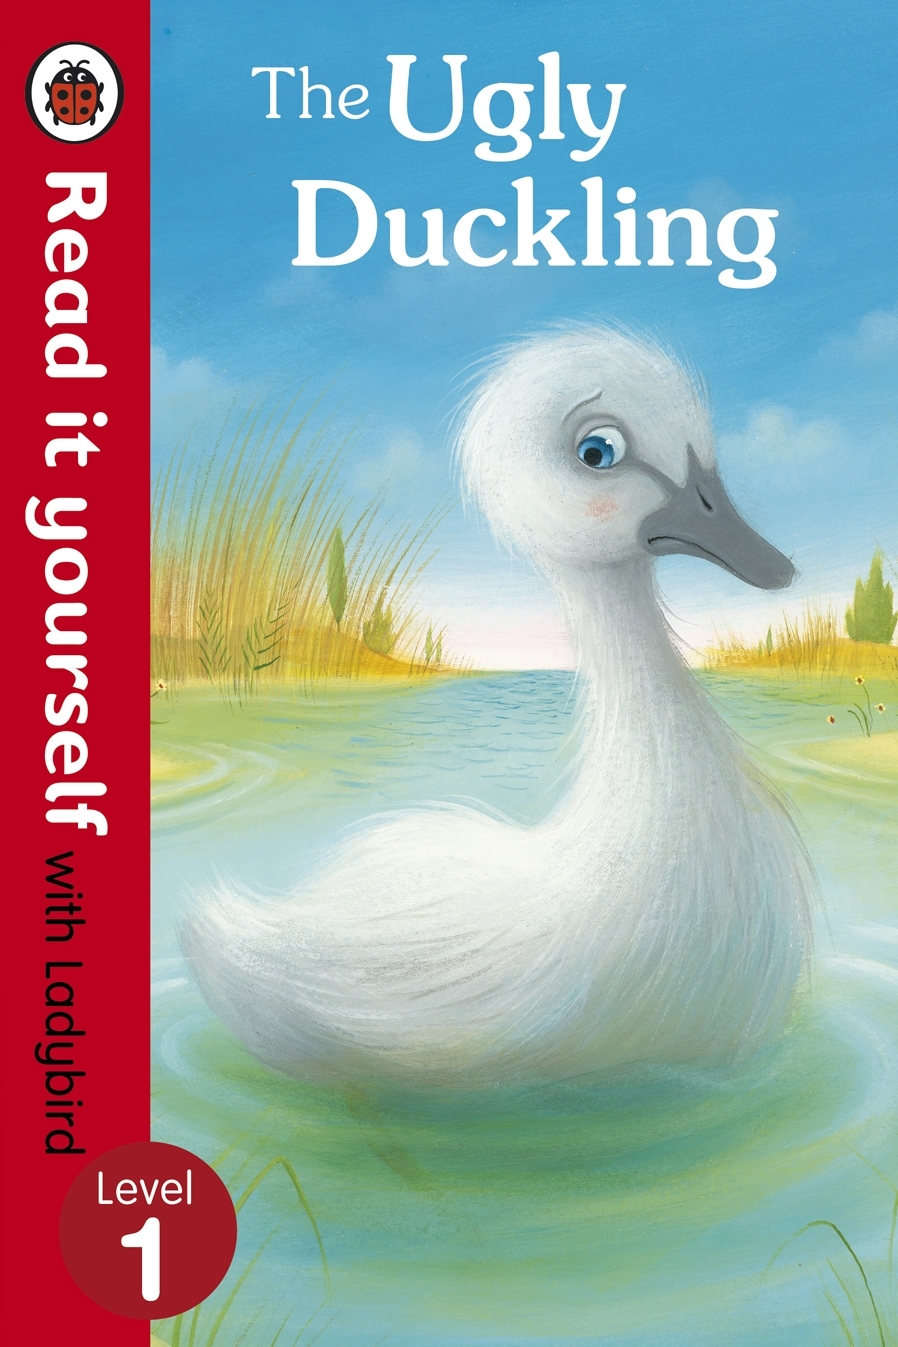 book review on the ugly duckling